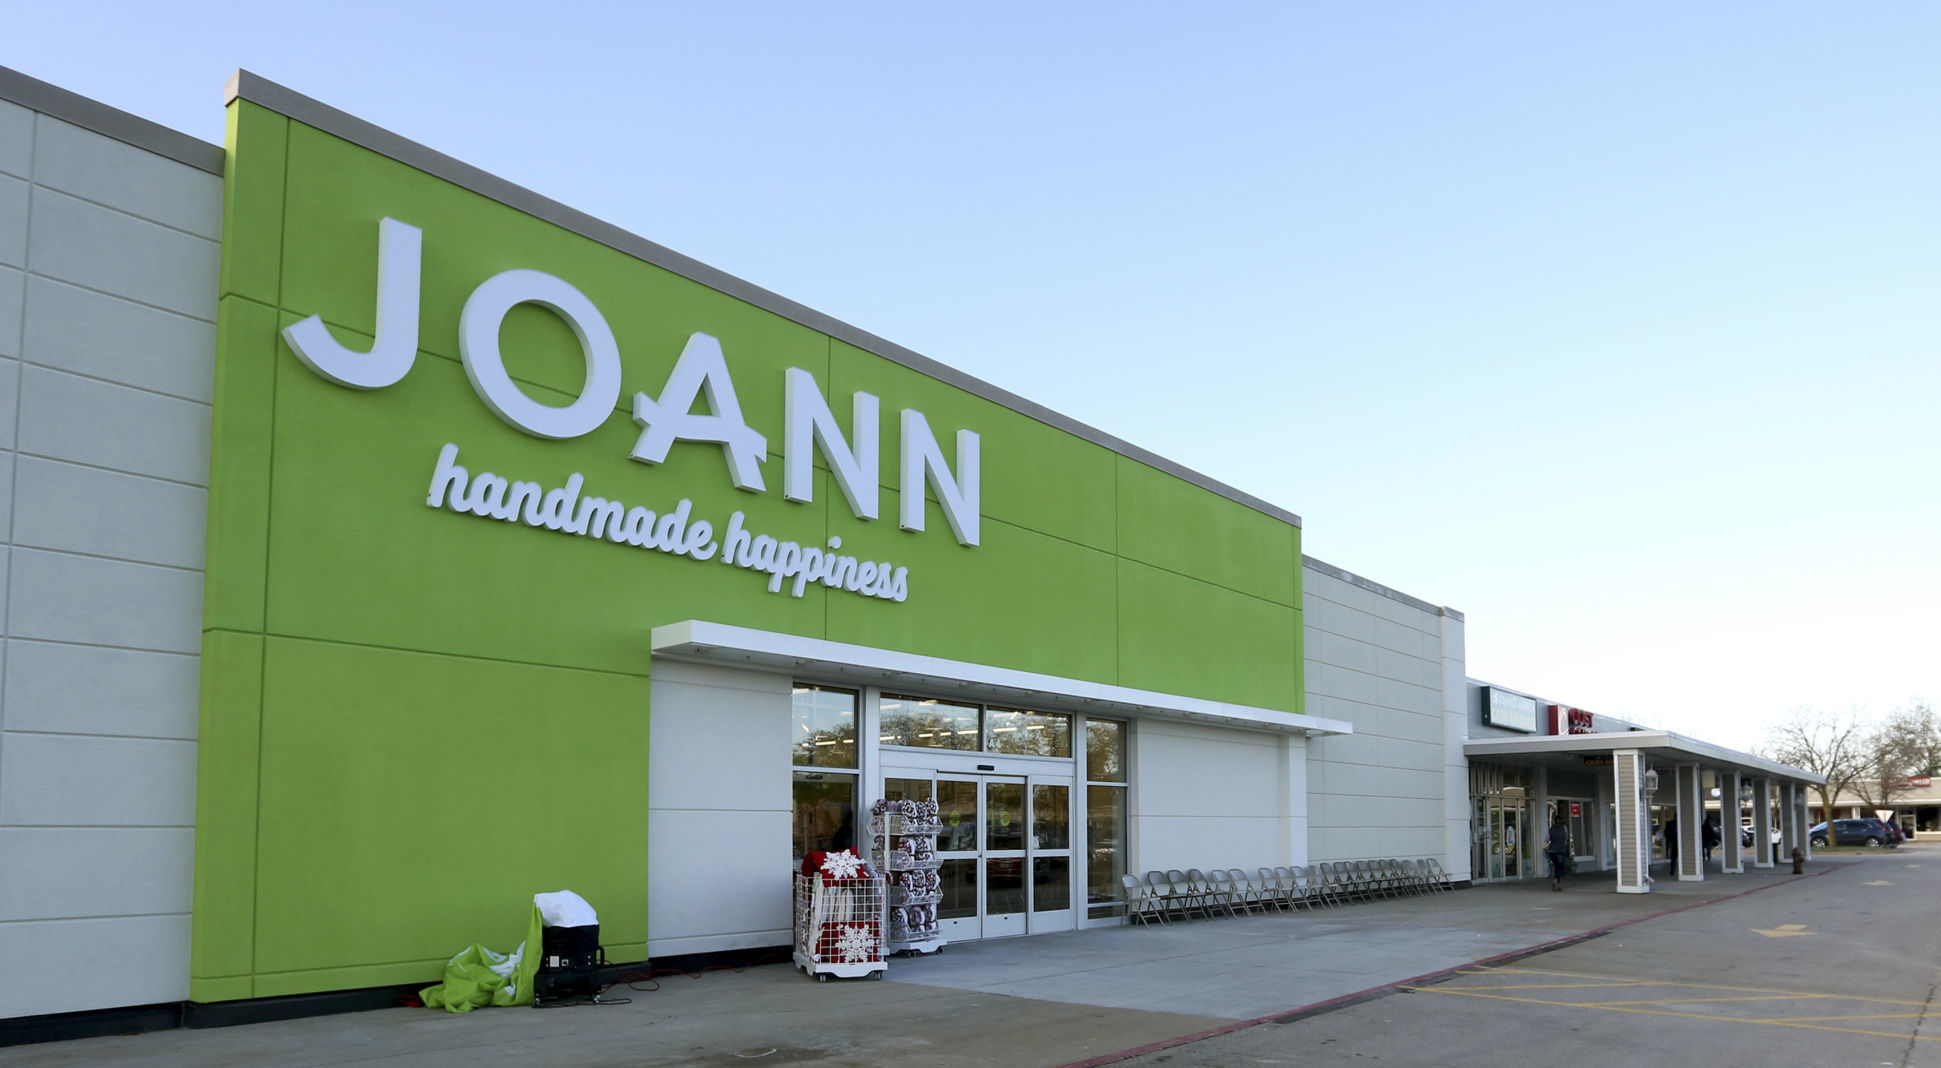 The JoAnn store in Dubuque. PHOTO CREDIT: JESSICA REILLY